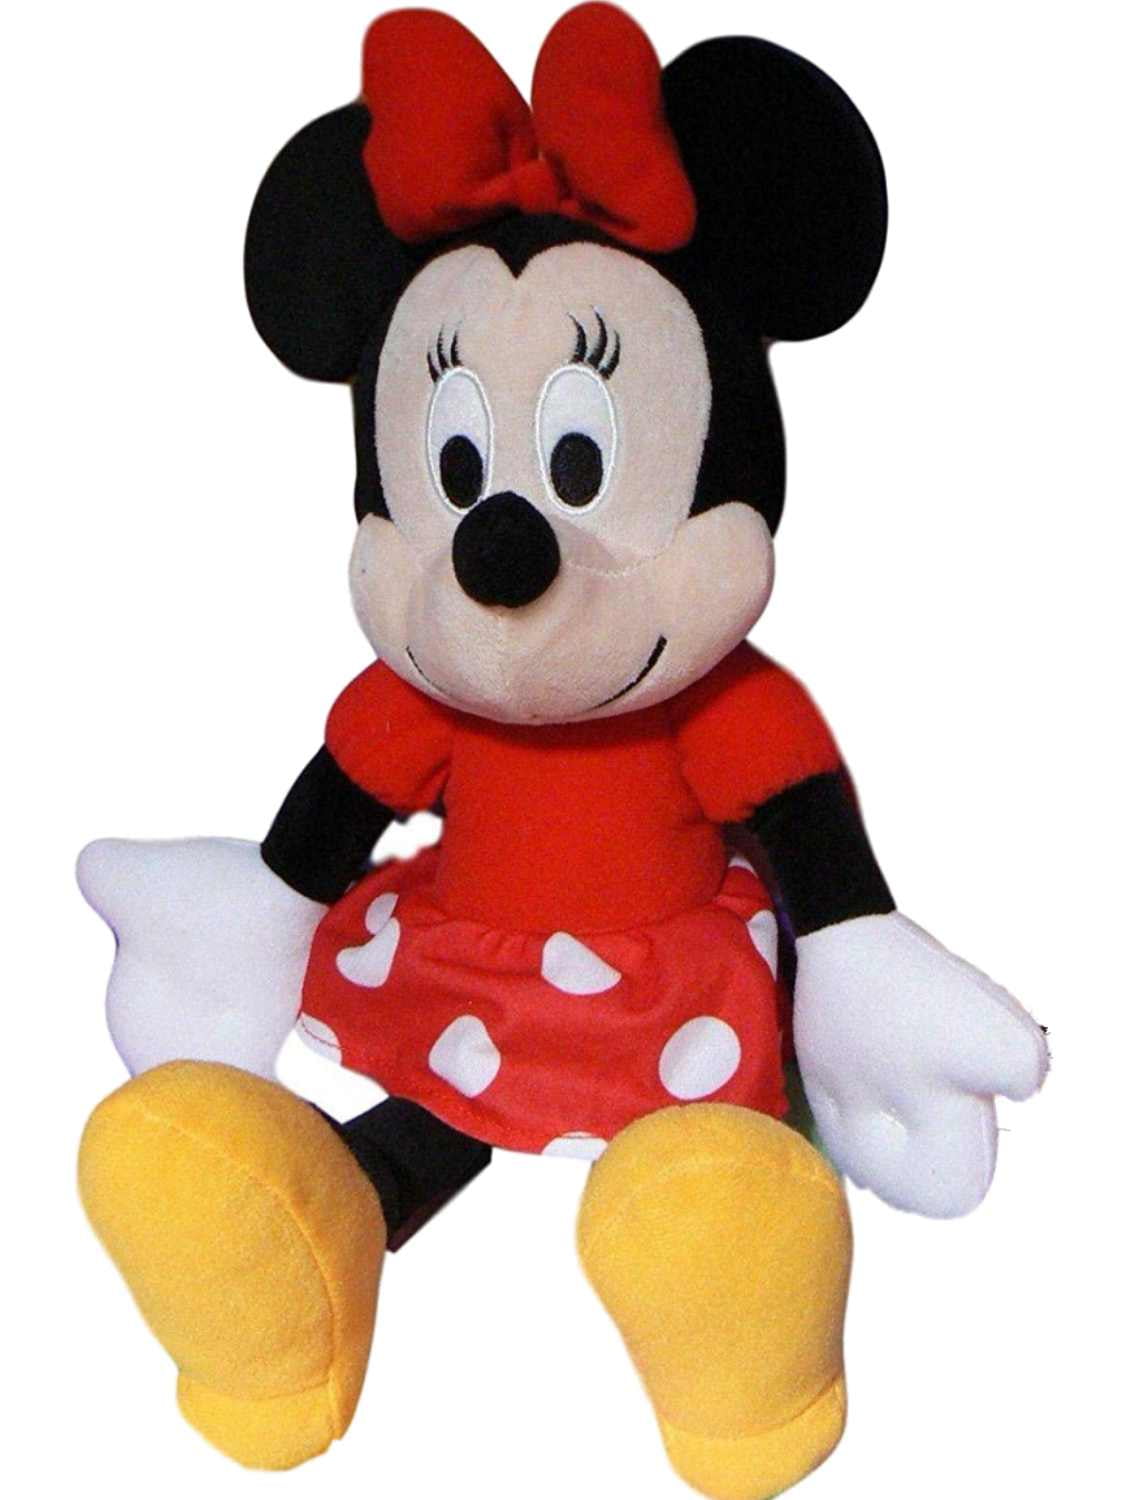 Disney Minnie Mouse Plush 14”  Plush In Red New 